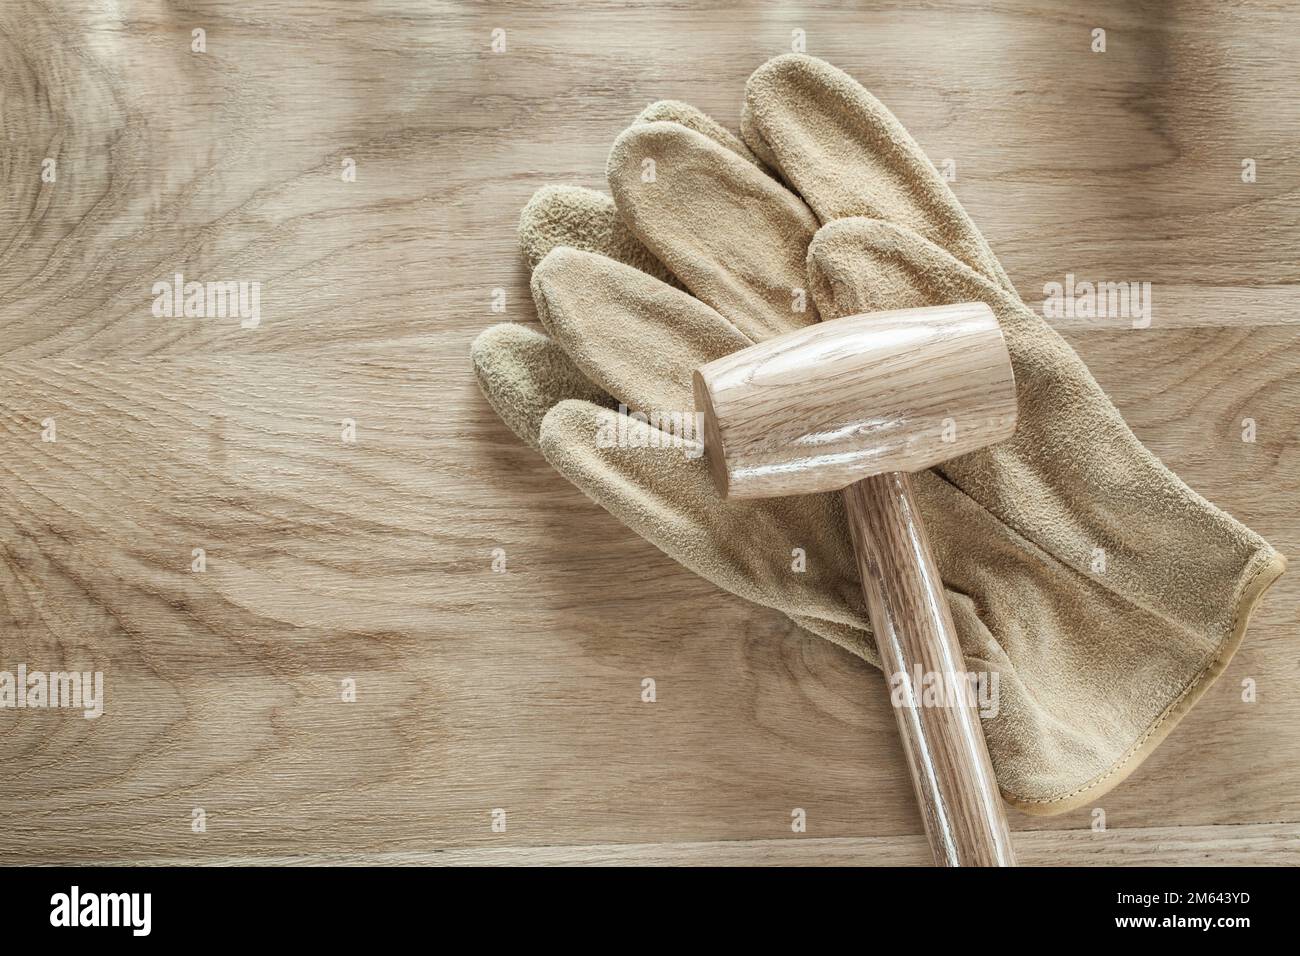 Leather protective gloves lump hammer on wooden board. Stock Photo